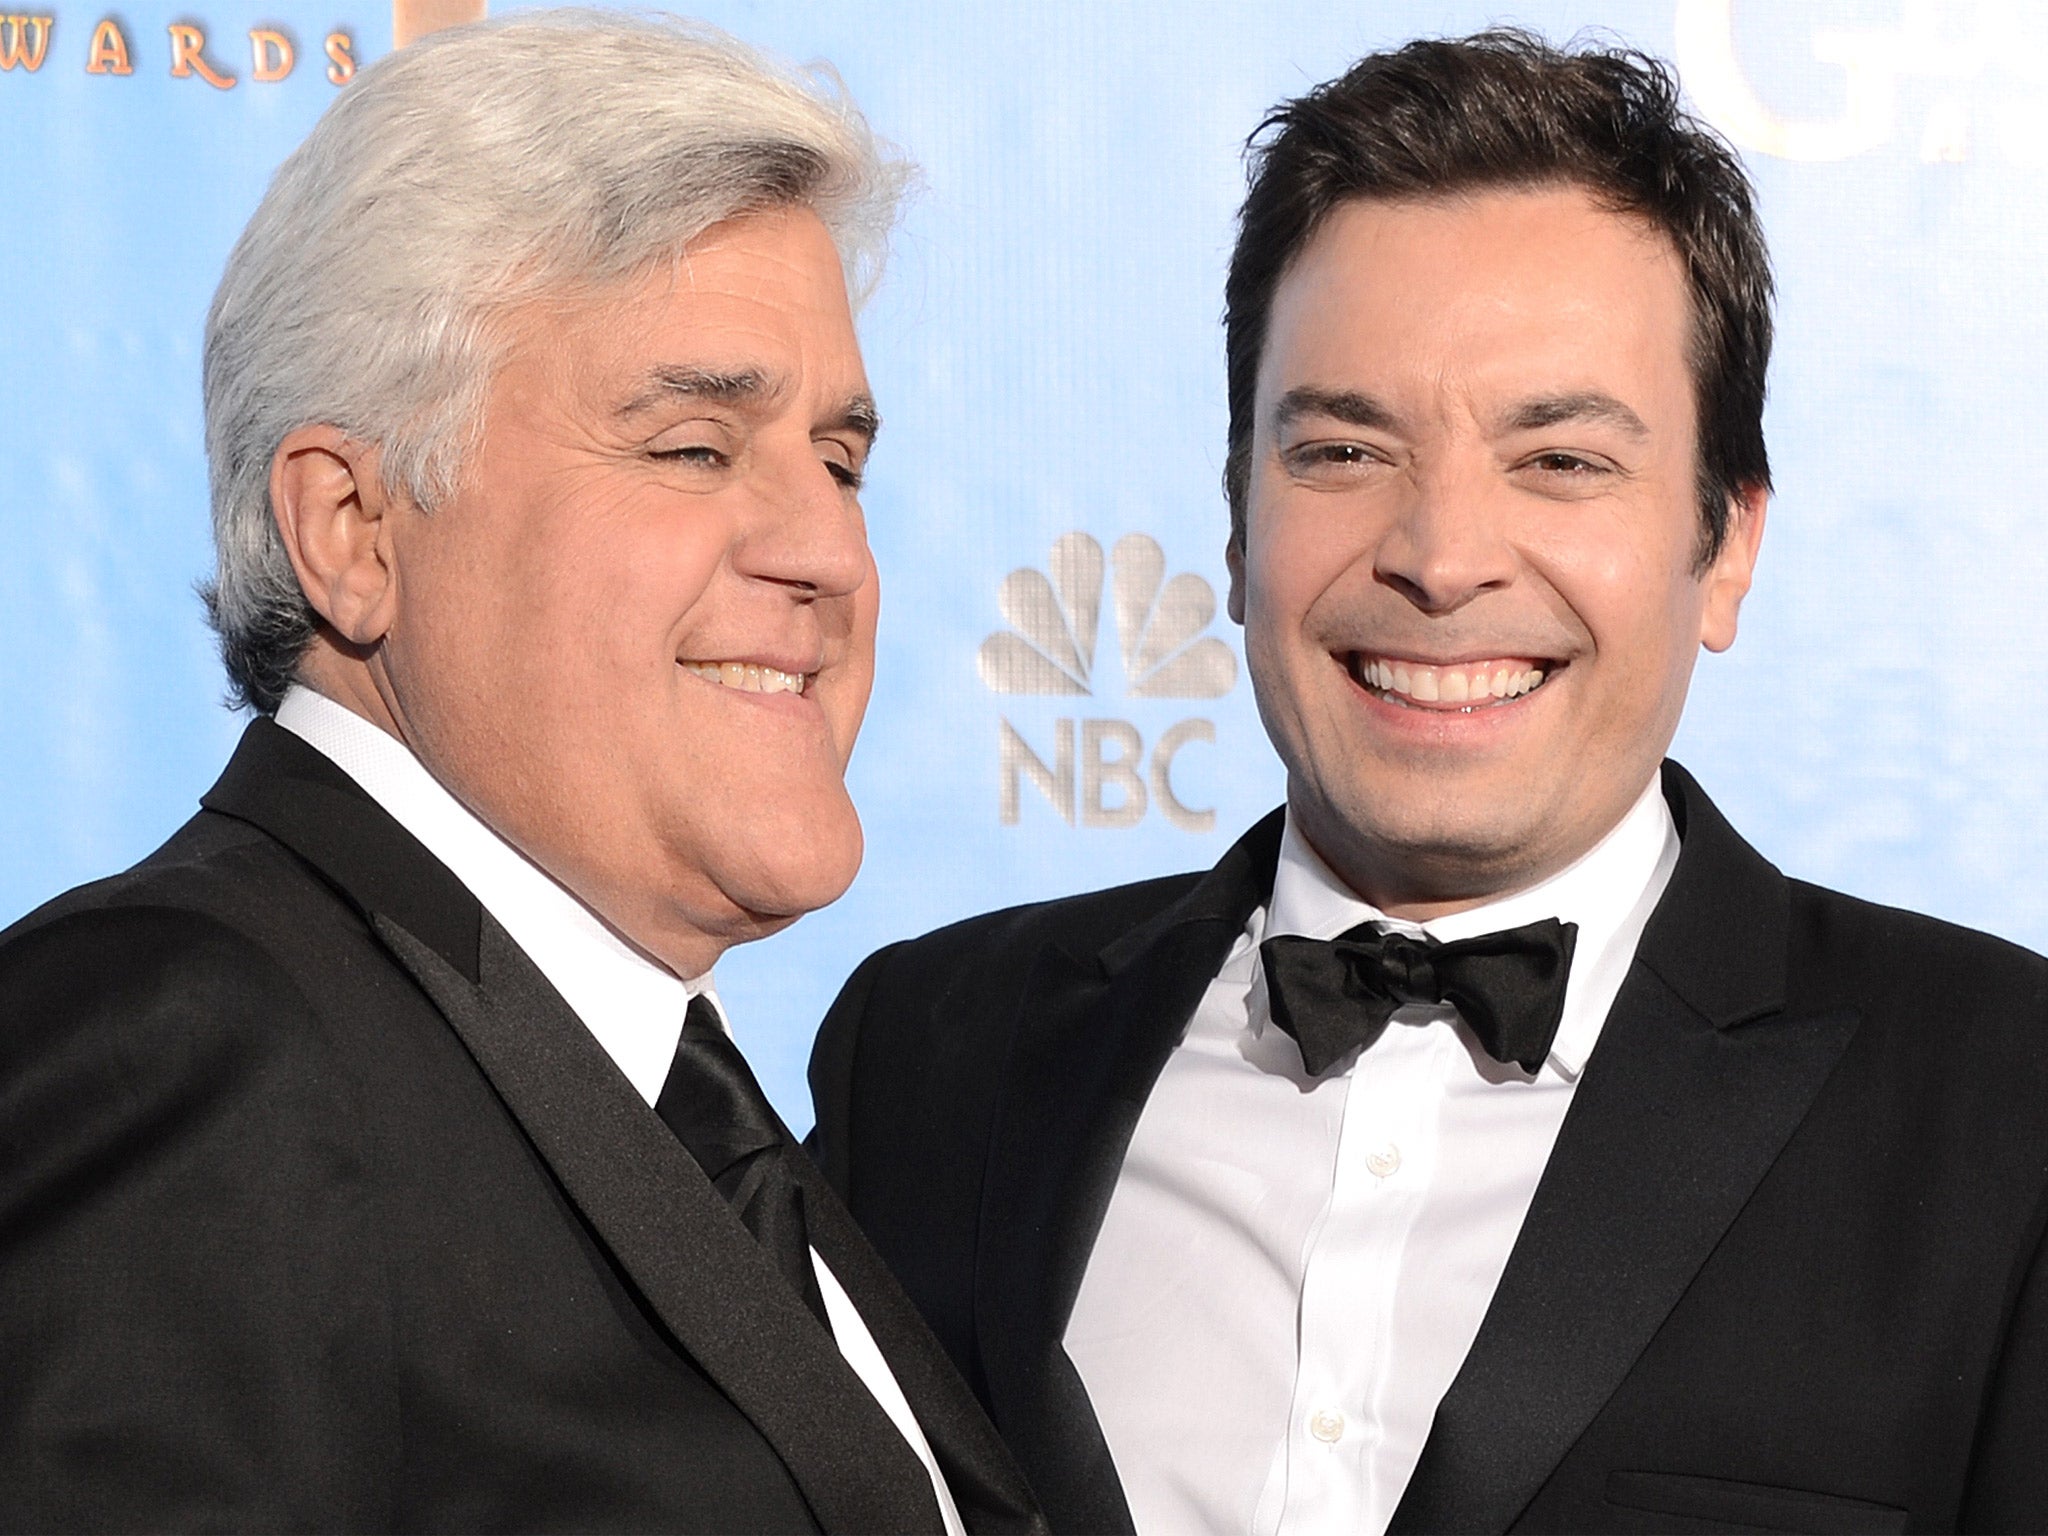 Jay Leno in happier times with Jimmy Fallon